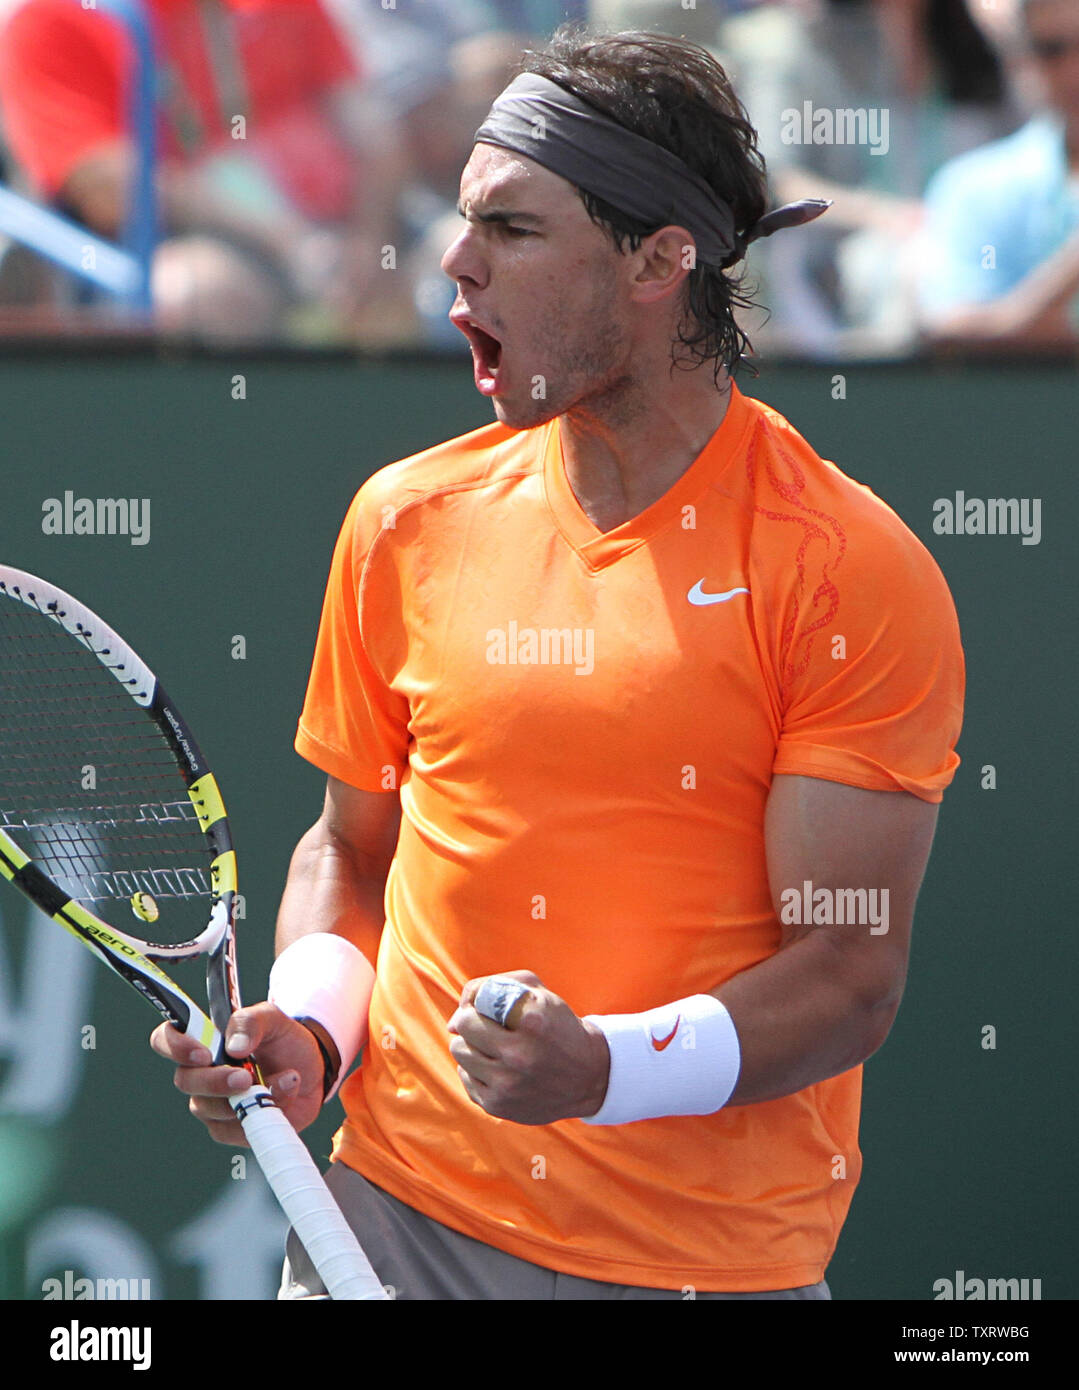 Spaniard Rafael Nadal reacts after a shot during his mens semi-final match against Argentine Juan Martin Del Potro at the BNP Paribas Open in Indian Wells, California on March 19, 2011.  Nadal defeated Del Potro 6-4, 6-4 to advance to the tournament final.   UPI/David Silpa Stock Photo